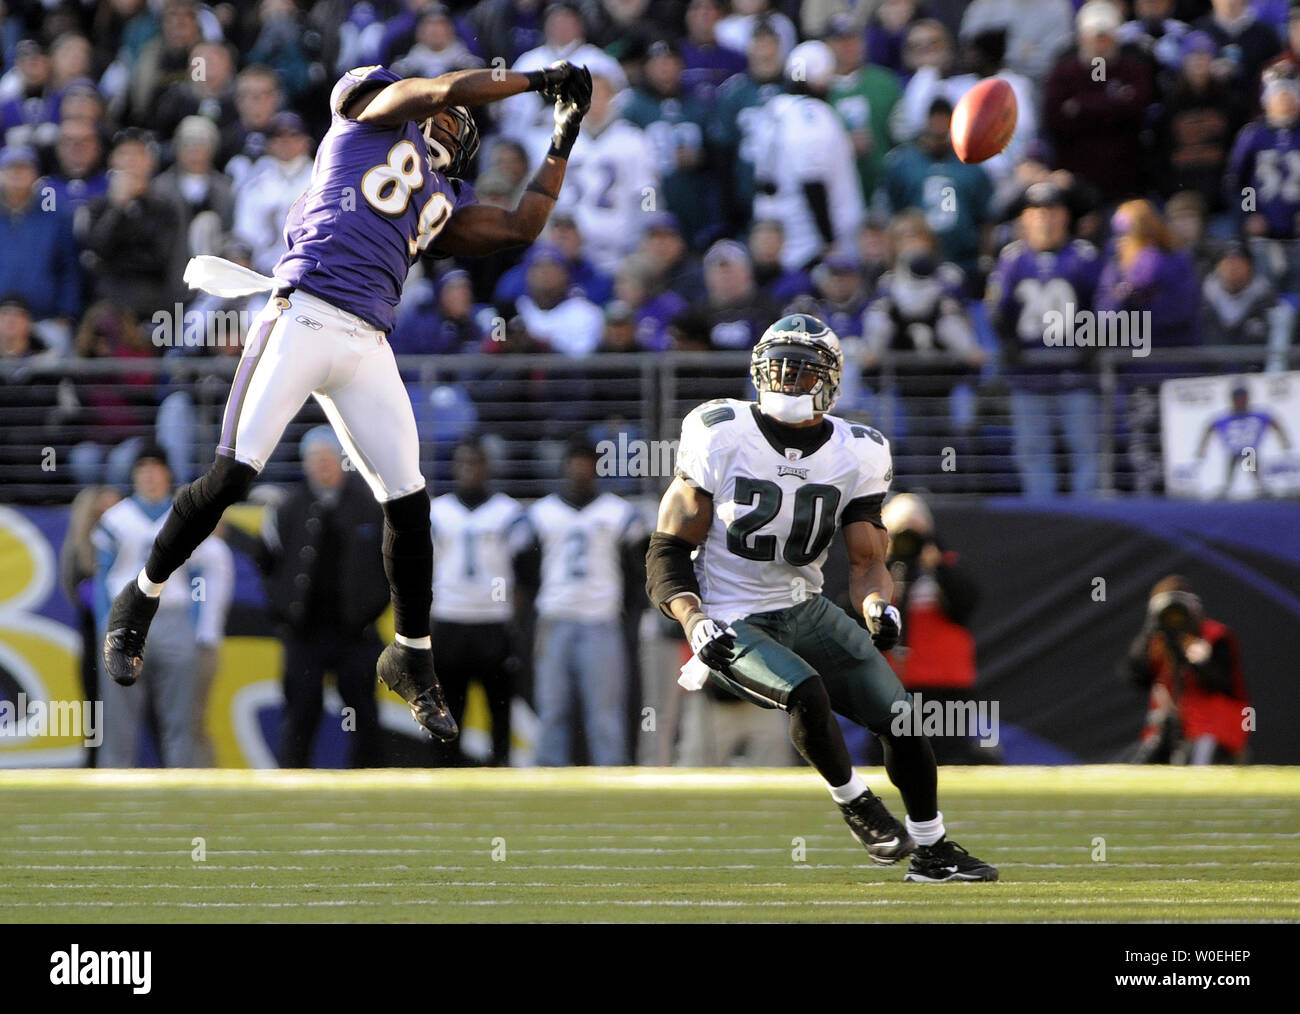 Baltimore Ravens wide receiver Mark Clayton misses a completion as Philadelphia Eagles Brian Dawkins provides coverage during the second quarter at M & T Bank Stadium in Baltimore, Maryland on November 23, 2008. (UPI Photo/Kevin Dietsch) Stock Photo